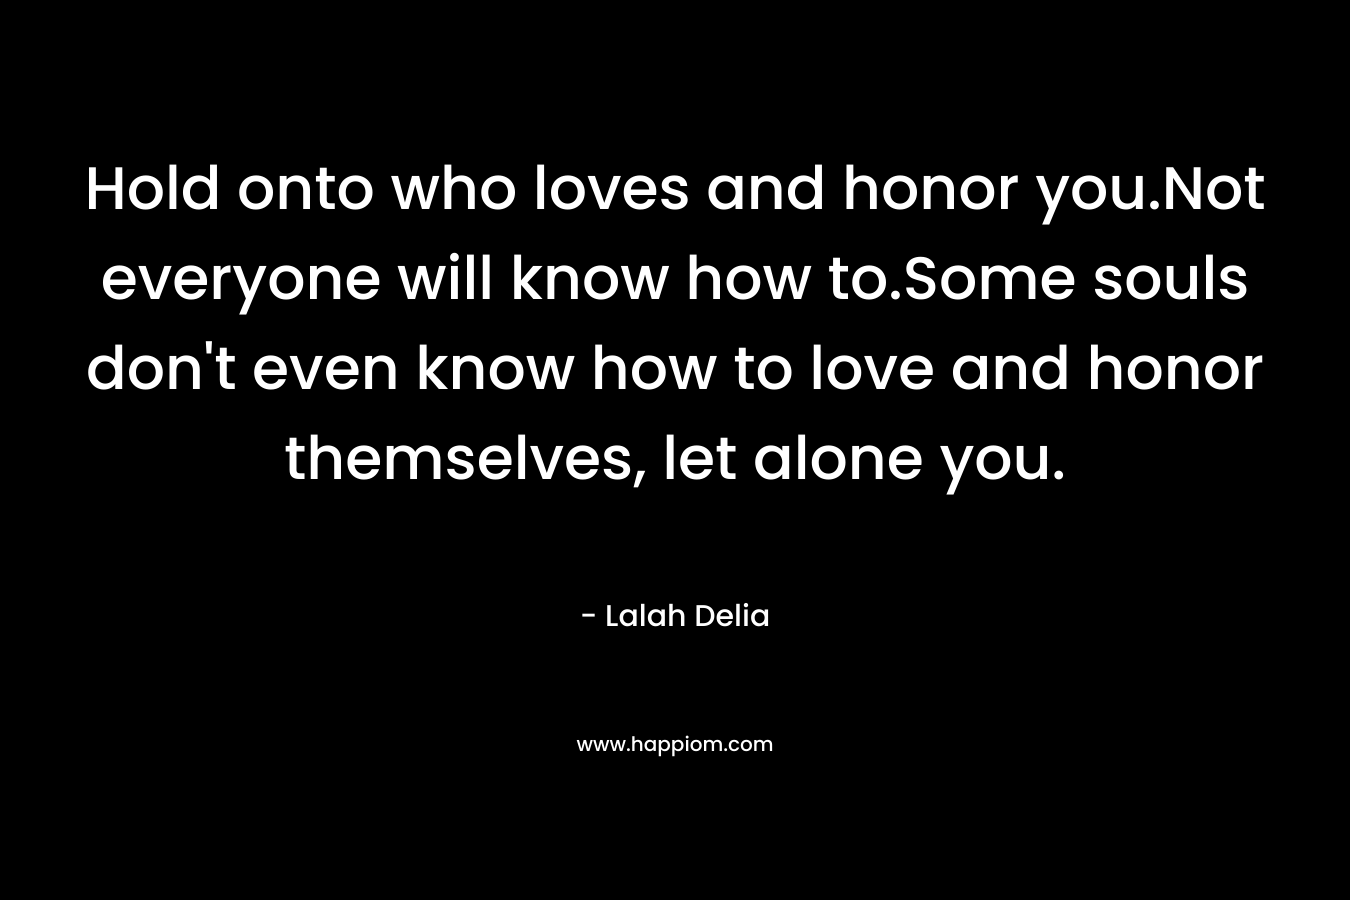 Hold onto who loves and honor you.Not everyone will know how to.Some souls don't even know how to love and honor themselves, let alone you.